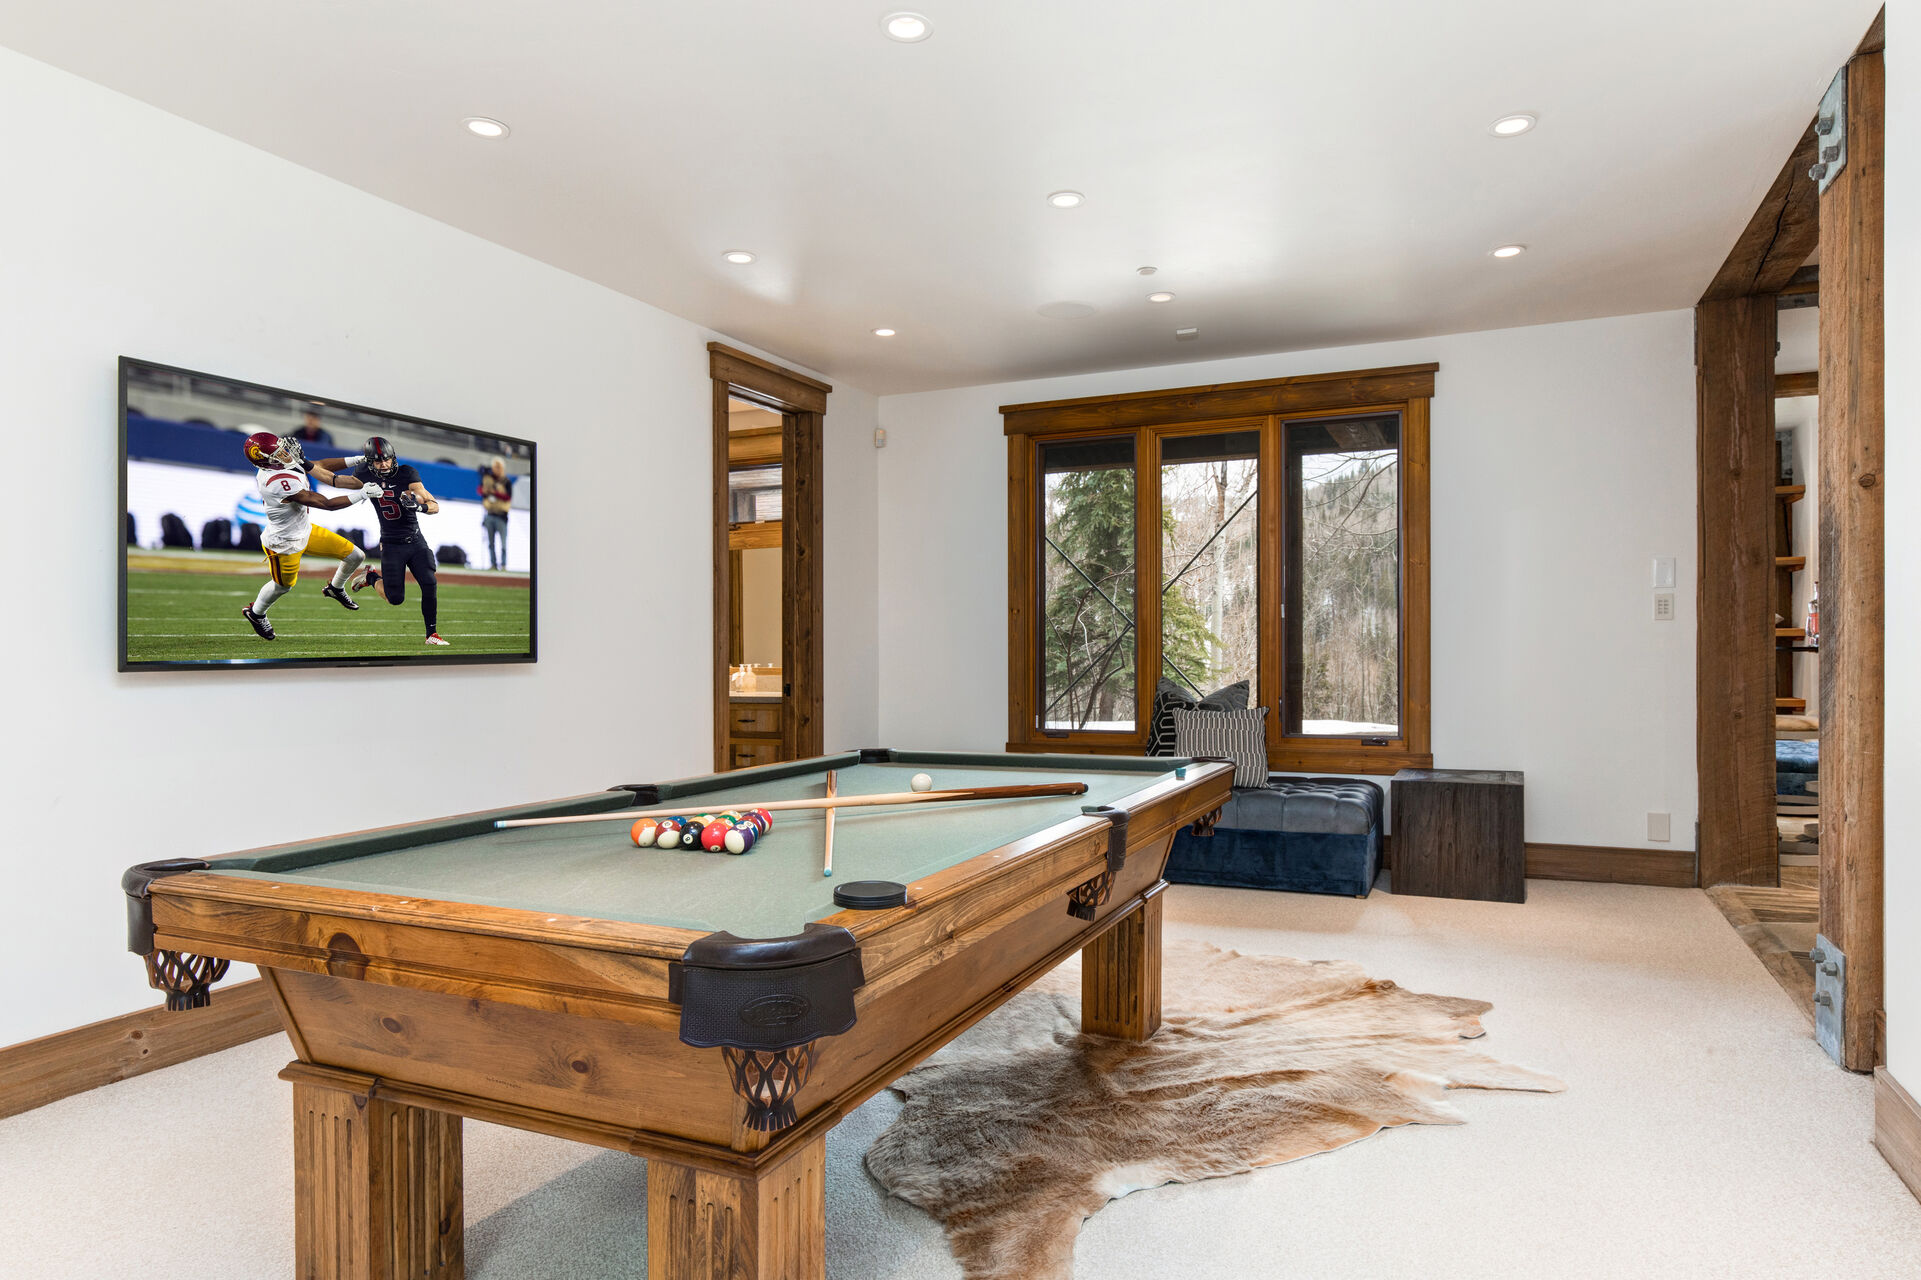 Ground level billiard area and access to Jack and Jill bathroom